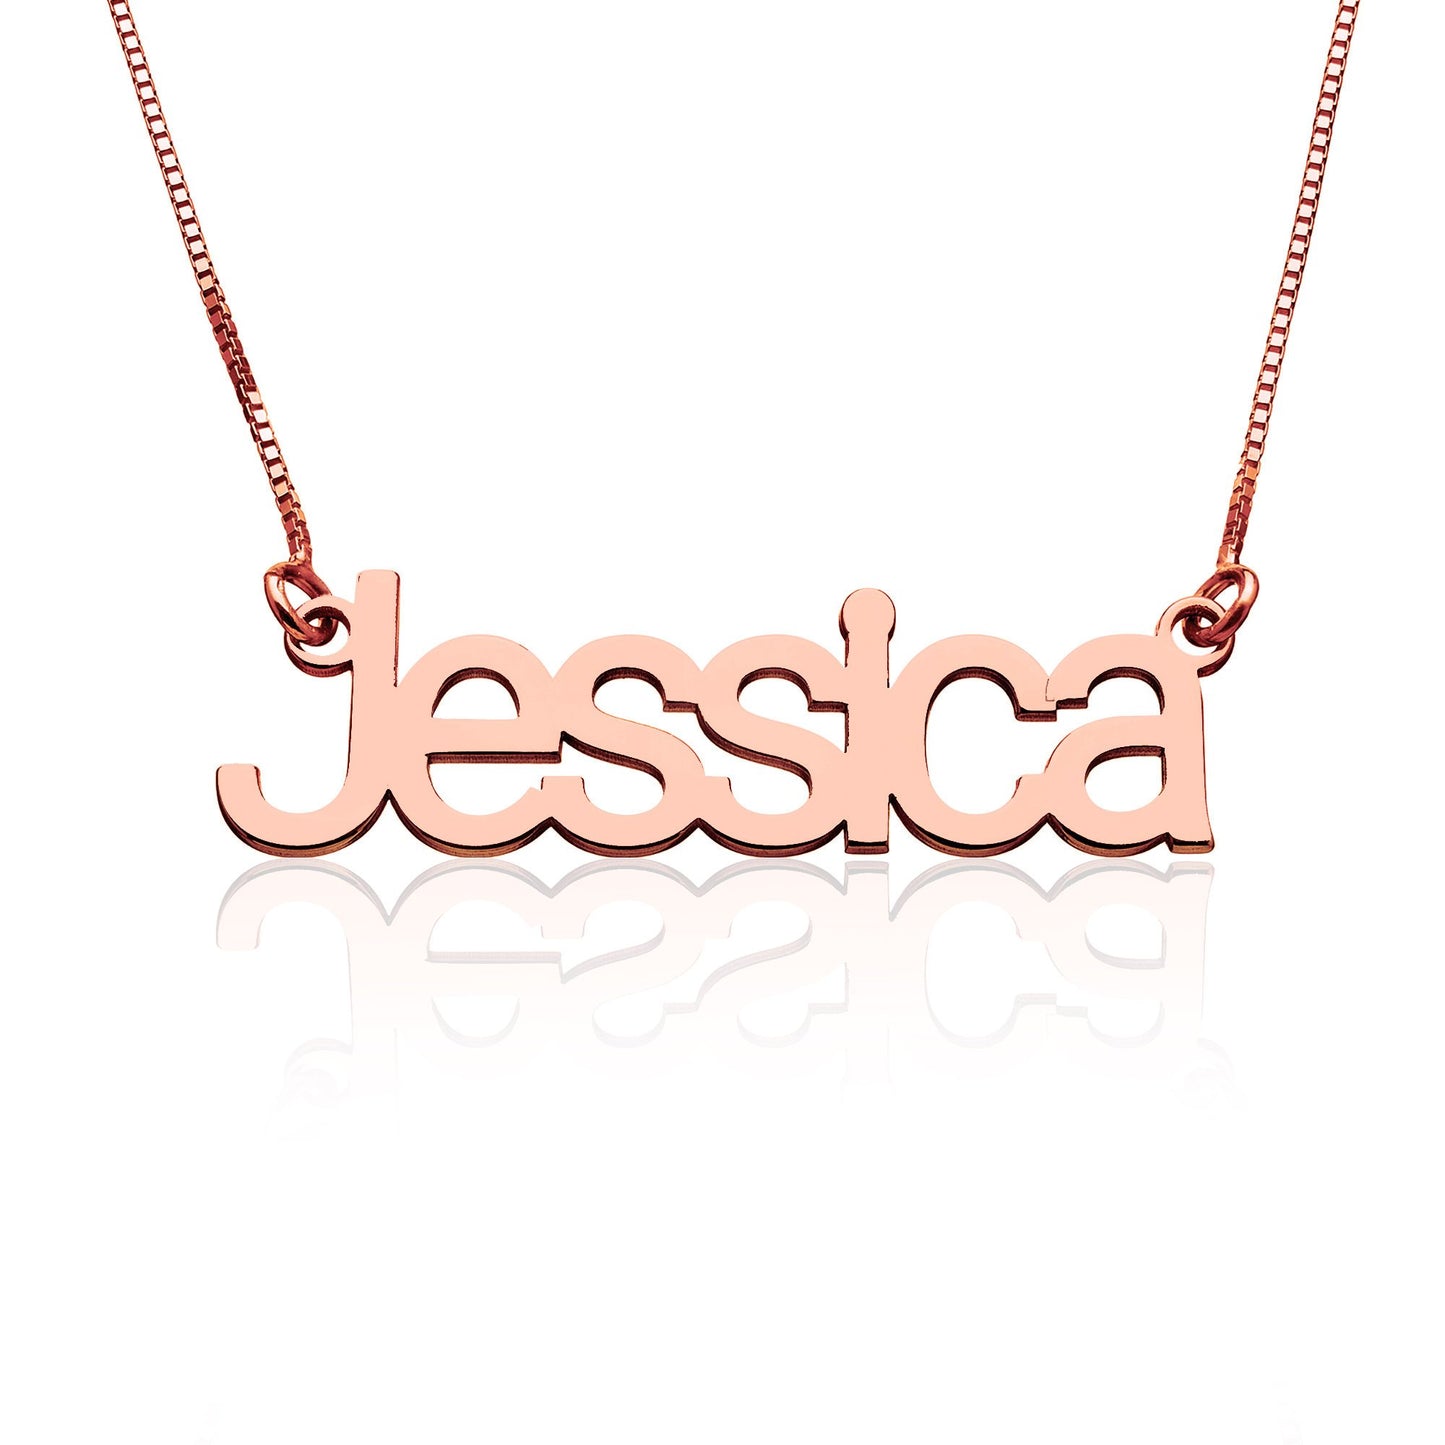 Customized name necklace